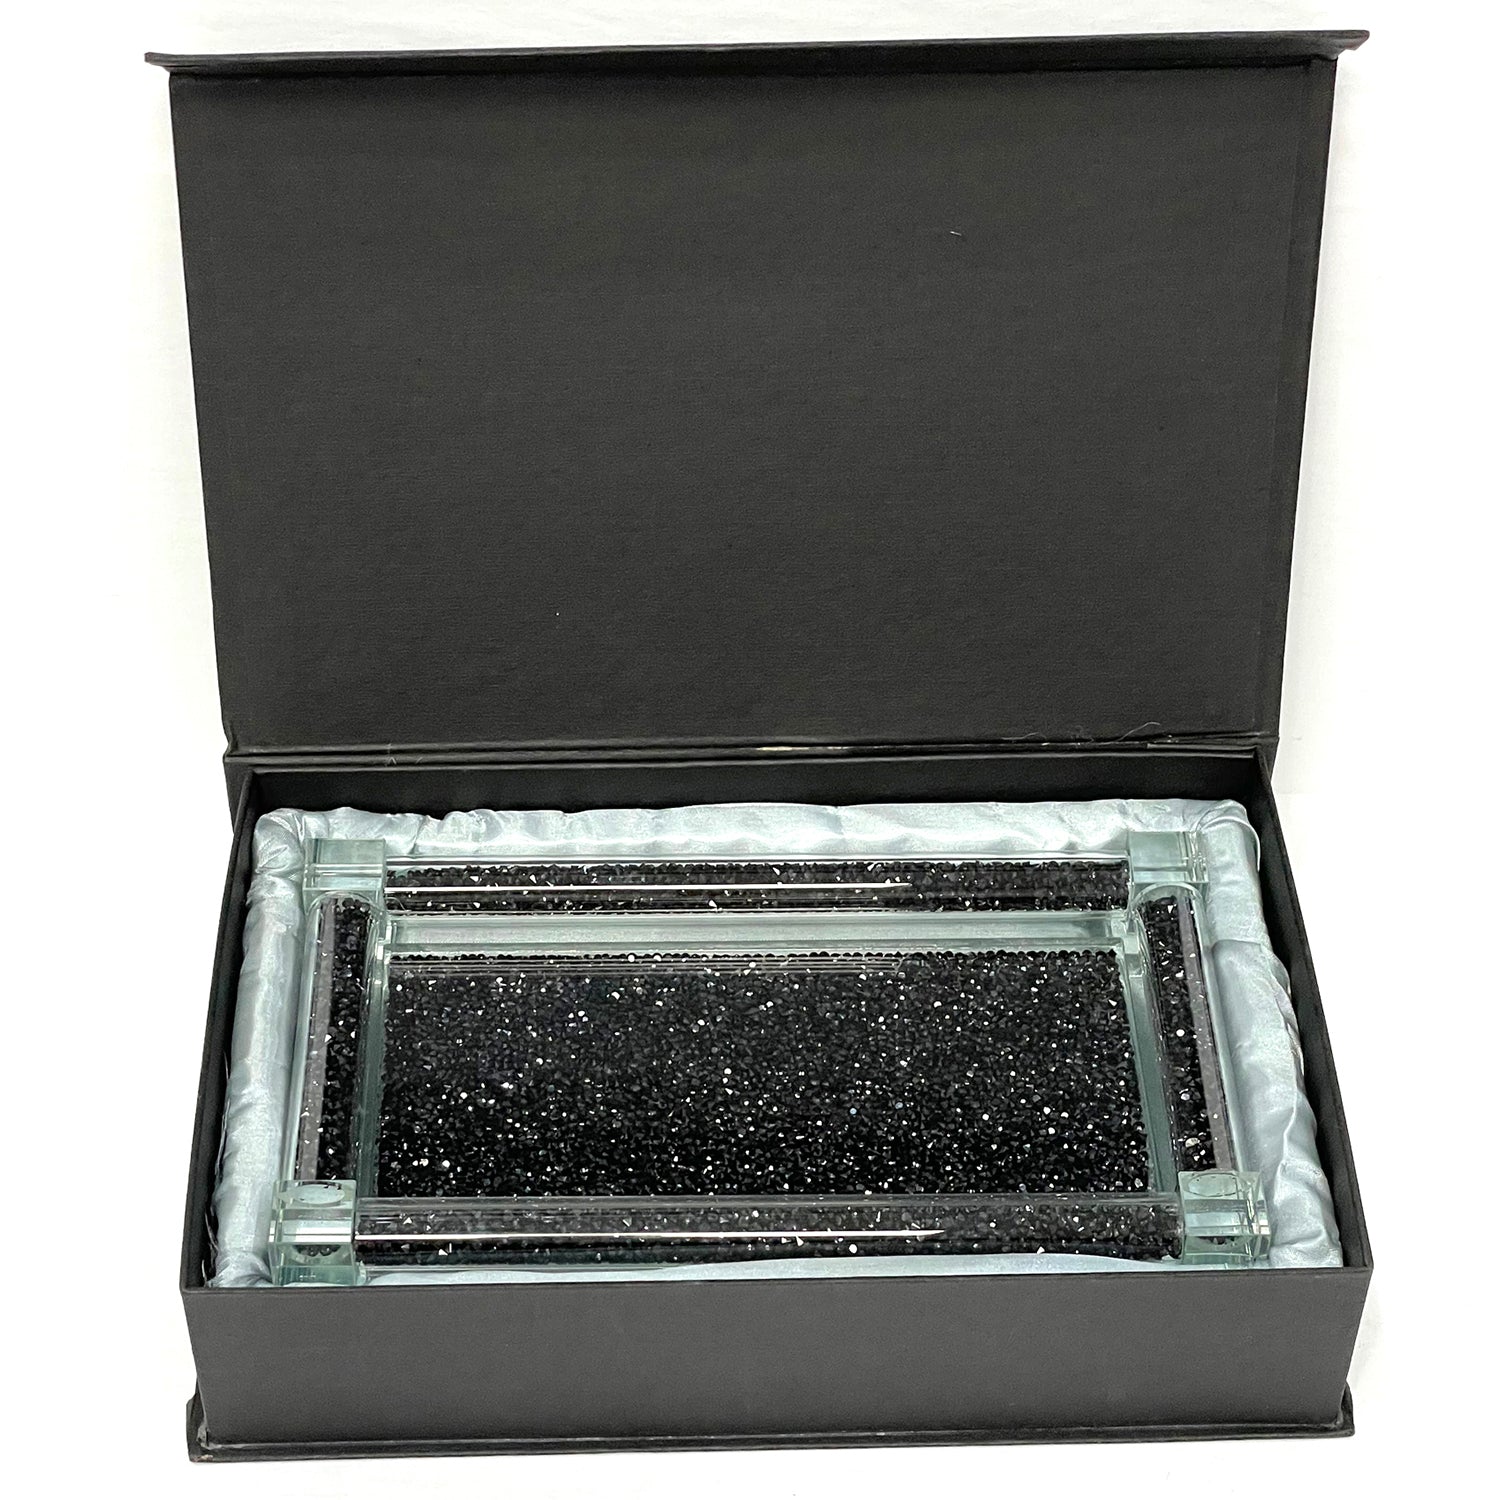 Ambrose Exquisite Medium Glass Tray in Gift Box black-glass